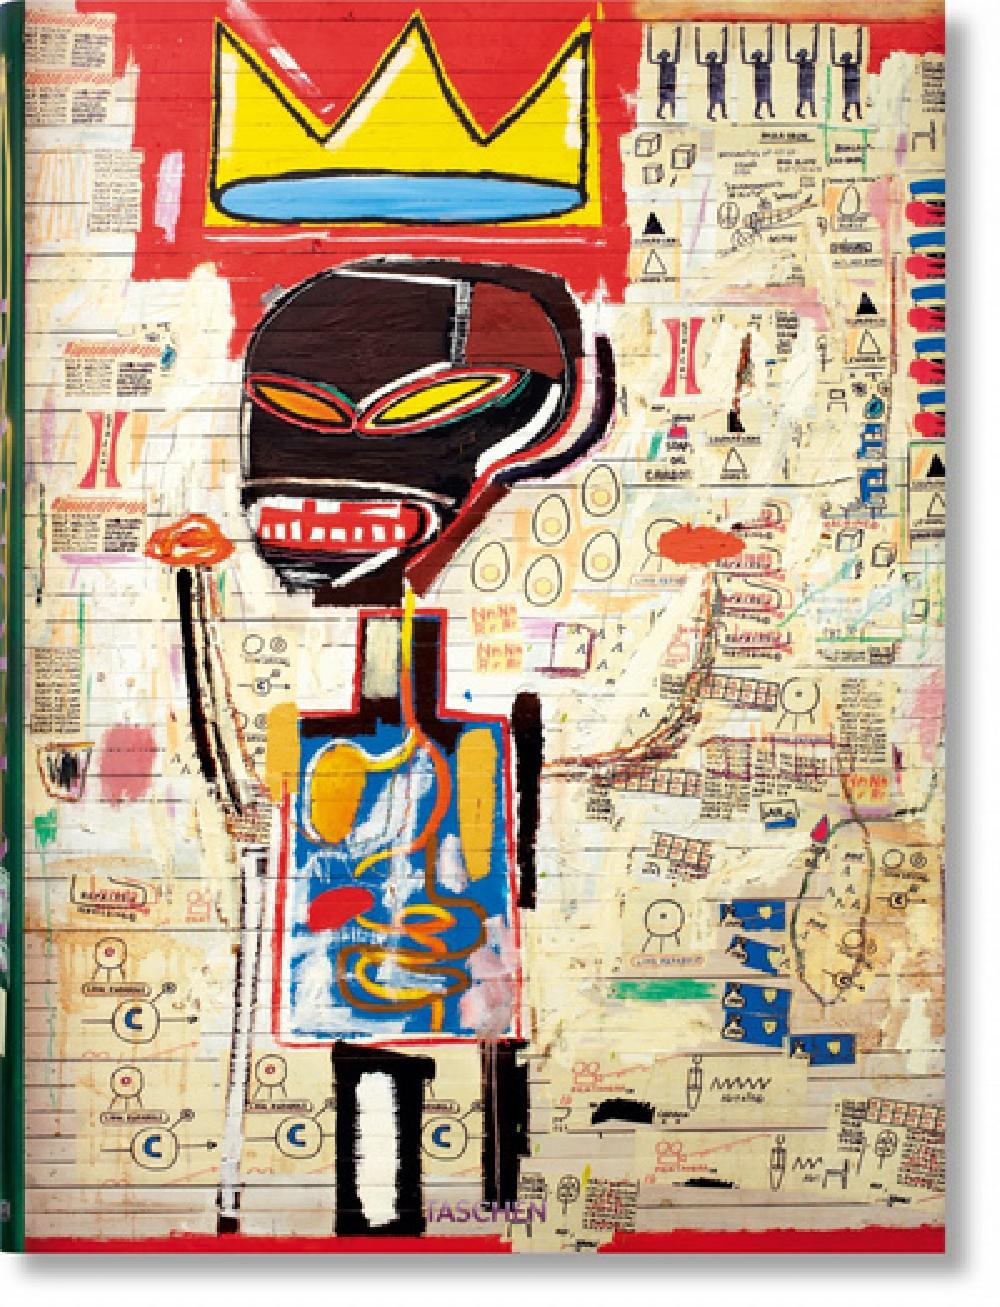 Jean-Michel Basquiat and the Art of Storyelling